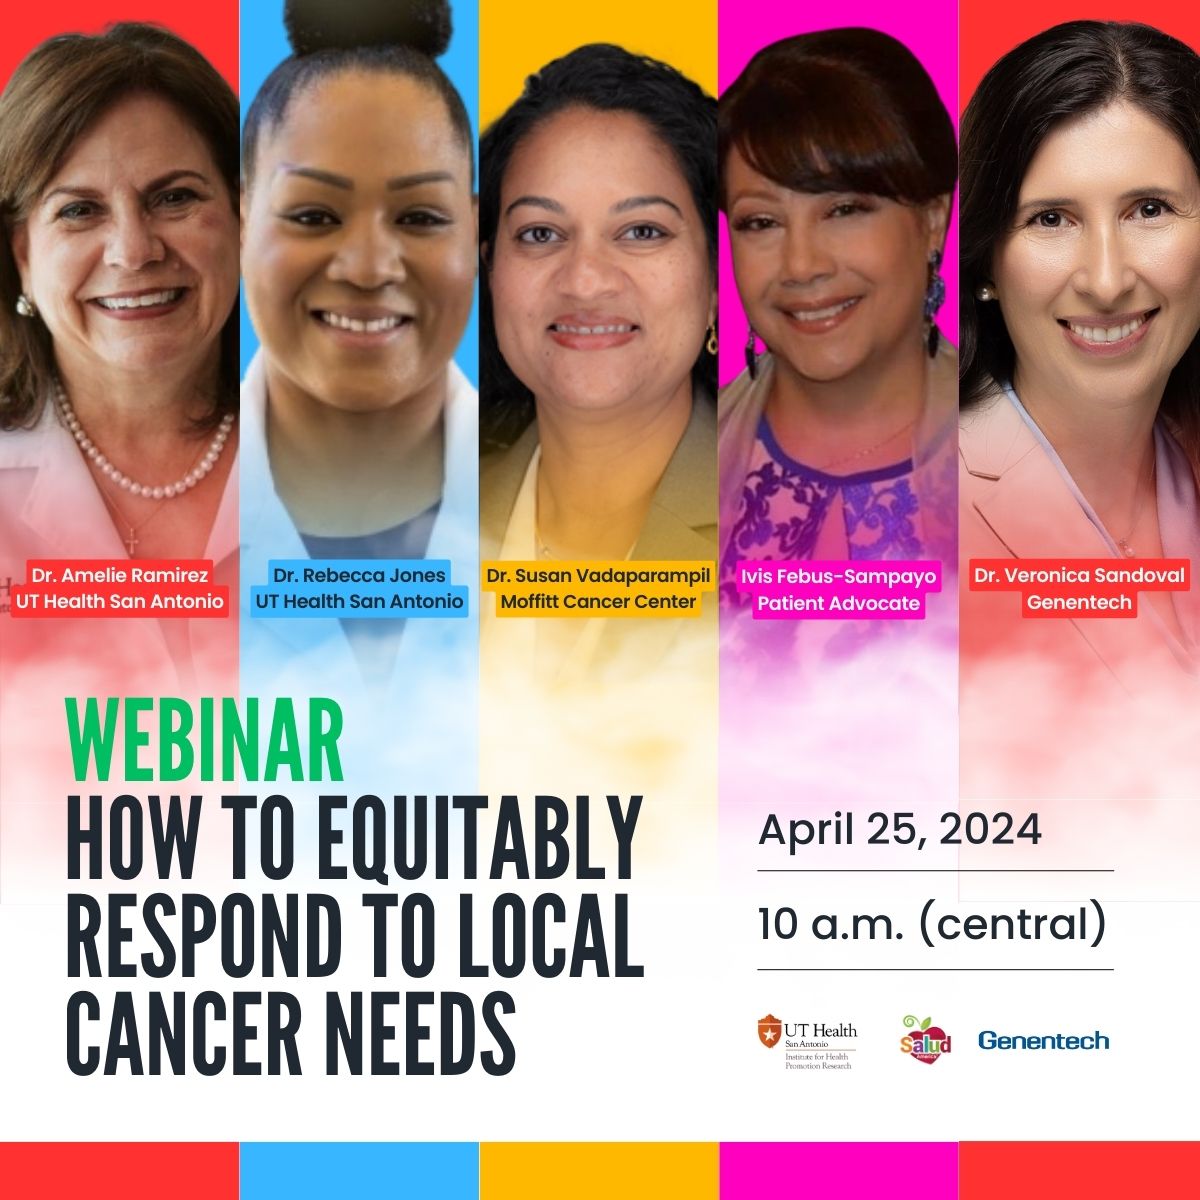 We need your help to address the Latino cancer burden – see what you can do in your local area! 🙏🏽 Register: bit.ly/equitywebevent @COlazagasti @HeadNeckMD @DrRobWinn @majoherran @NarjustFlorezMD @BriChristophers @MoraPinzonMD @CeliaMarAceves @ClaudiaCastZ @LatinasInMed